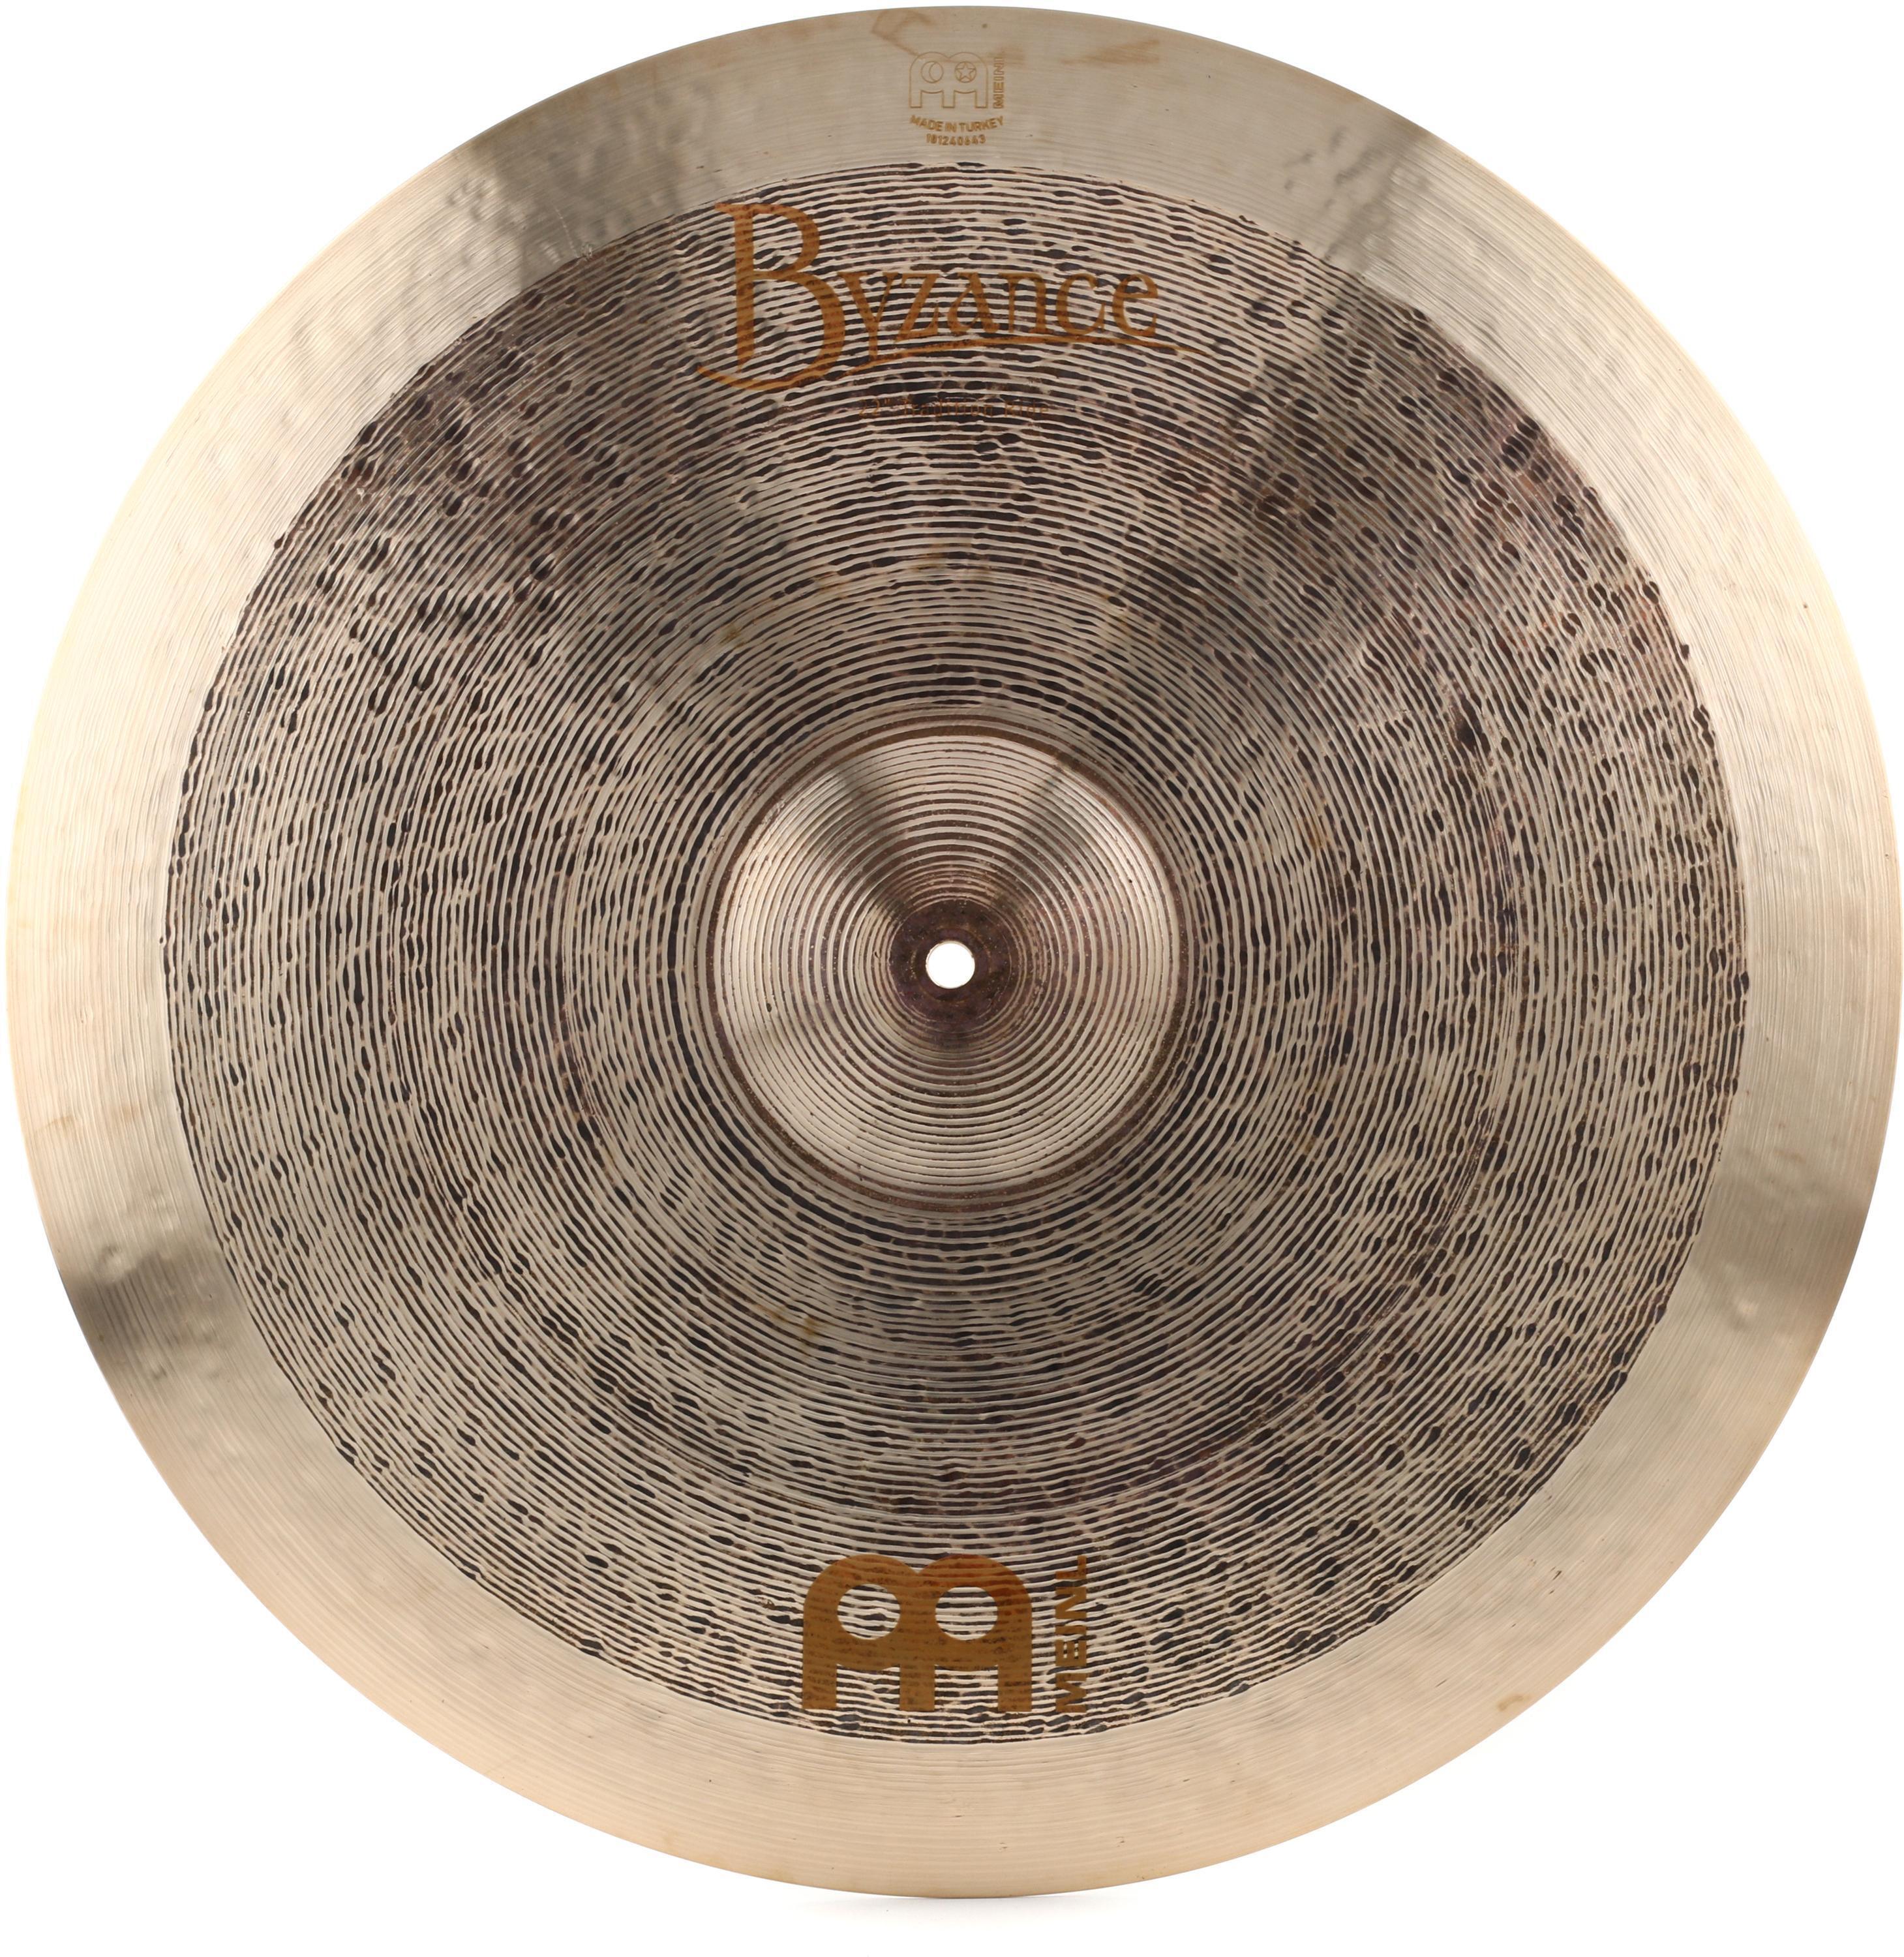 Meinl Cymbals 22 inch Byzance Tradition Ride Cymbal